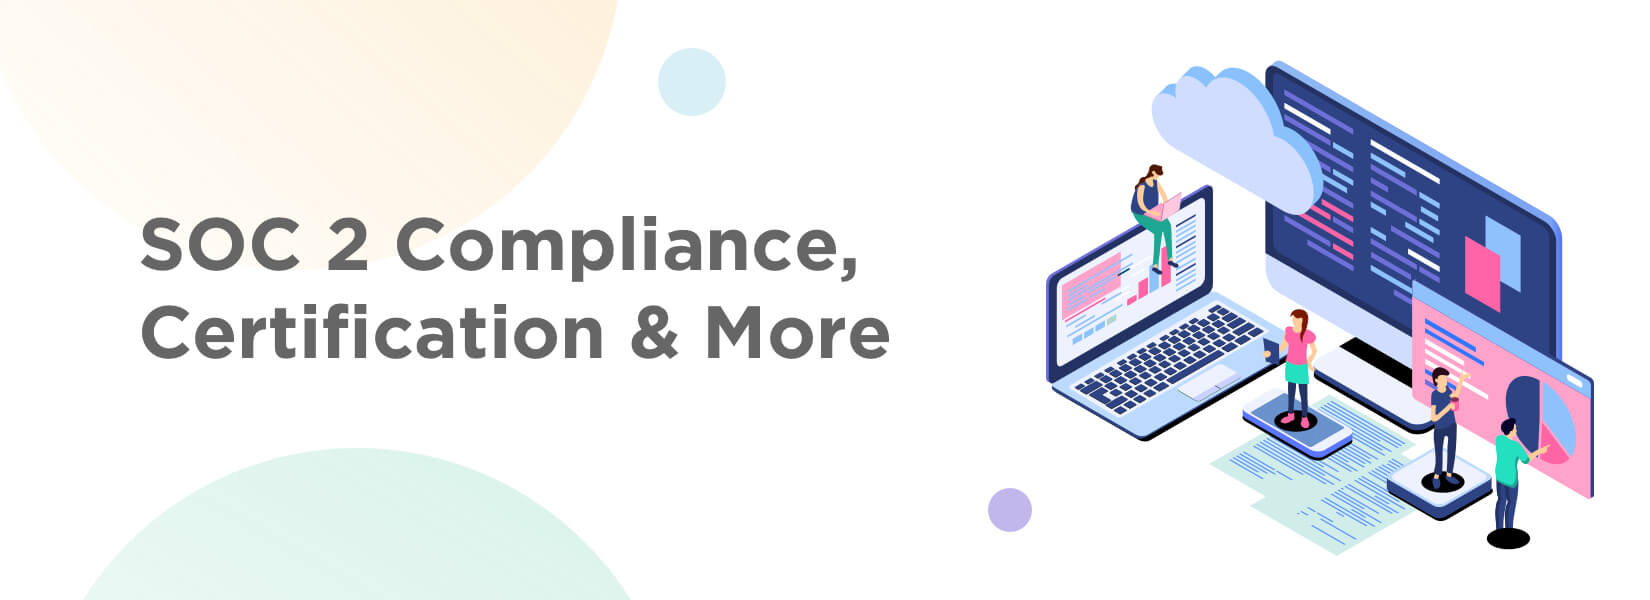 SOC 2 Compliance, Certification & More [All the Essentials]